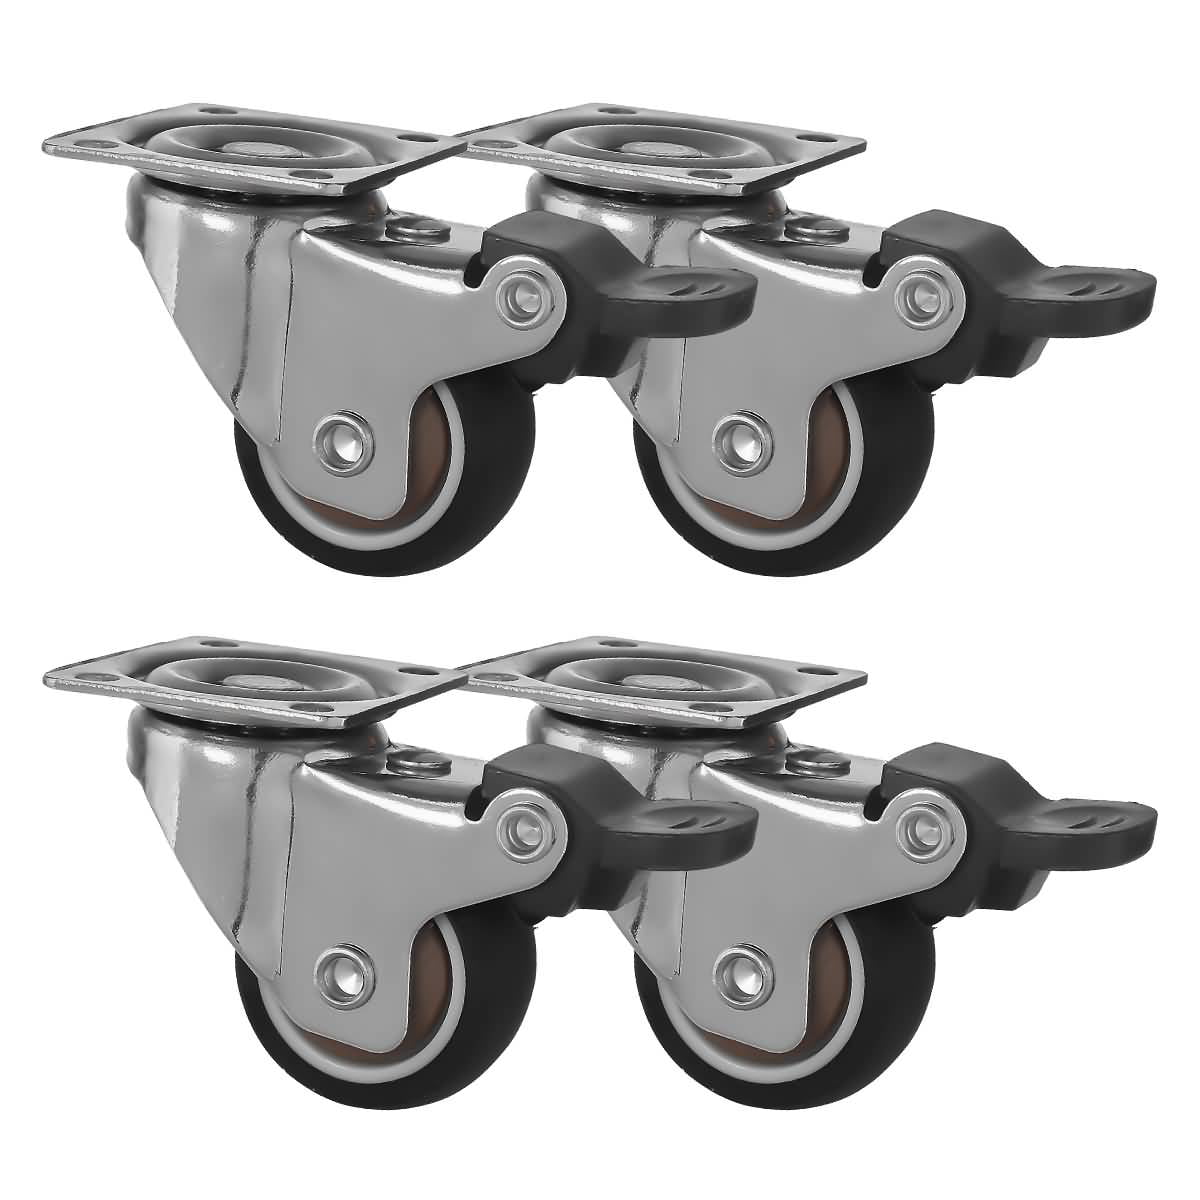 4 Pack 1.5" Low Profile Swivel Plate With Brake Brown Rubber Caster Wheels 